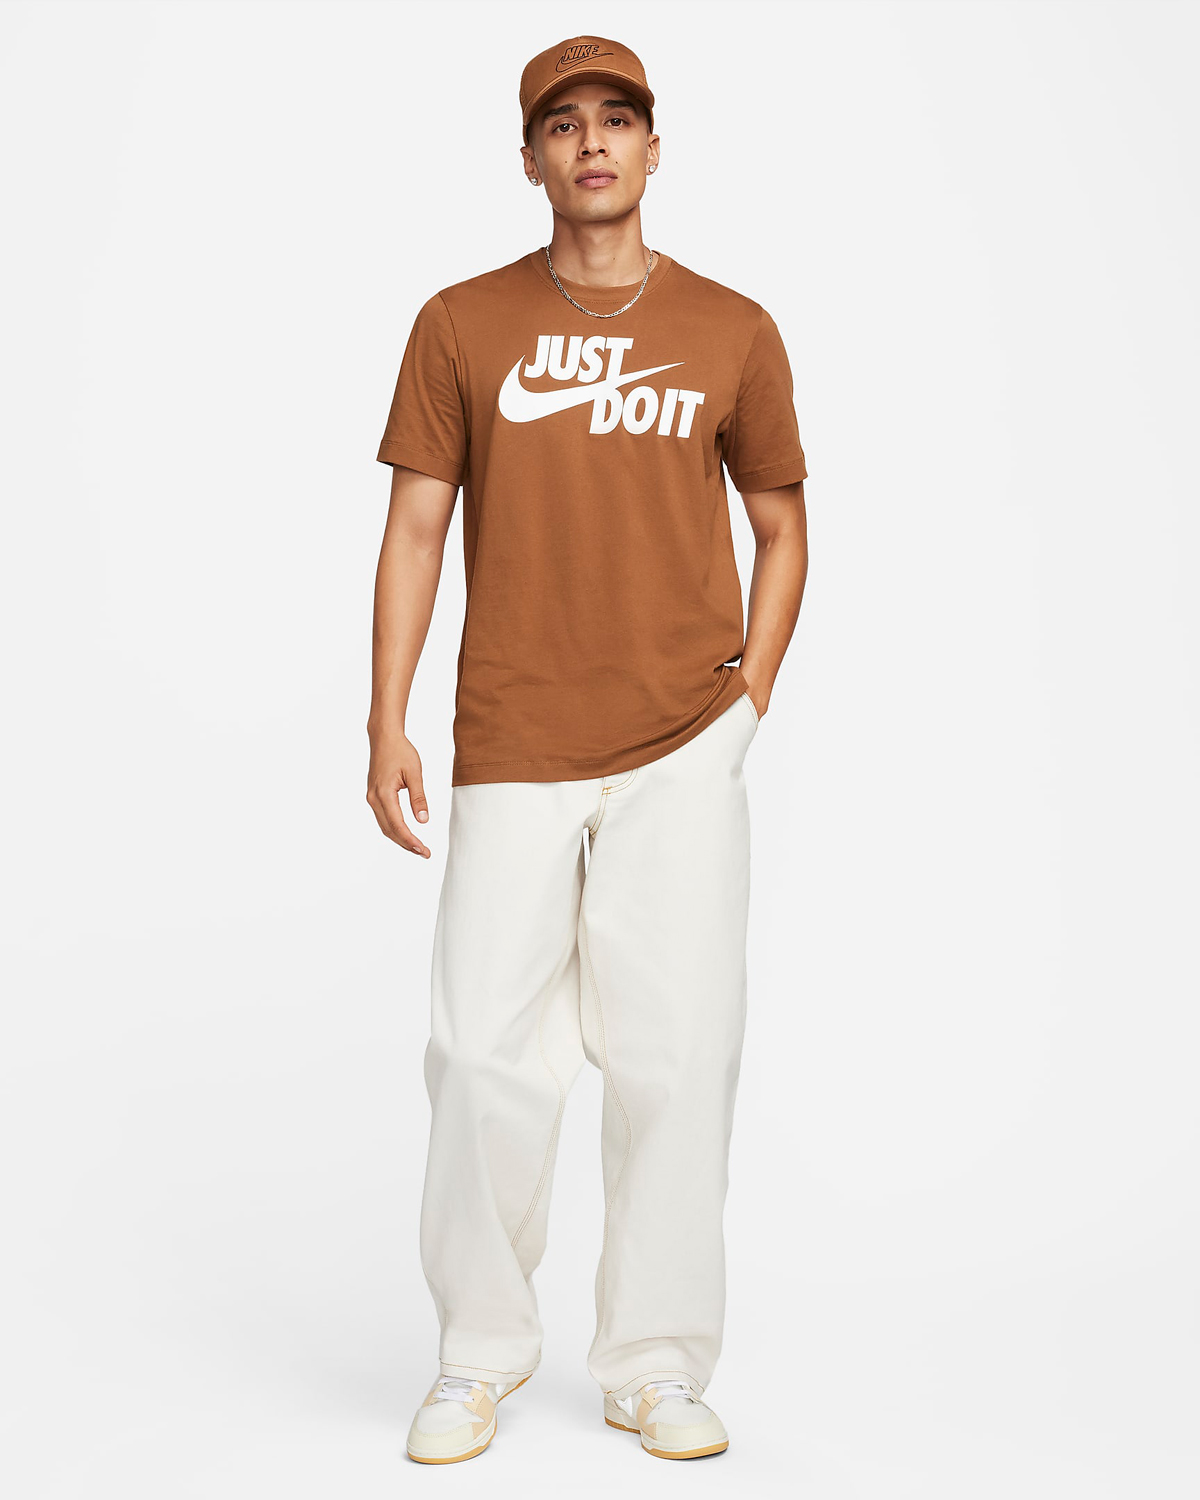 Nike Light British Tan Clothing Shirts Sneakers Outfits